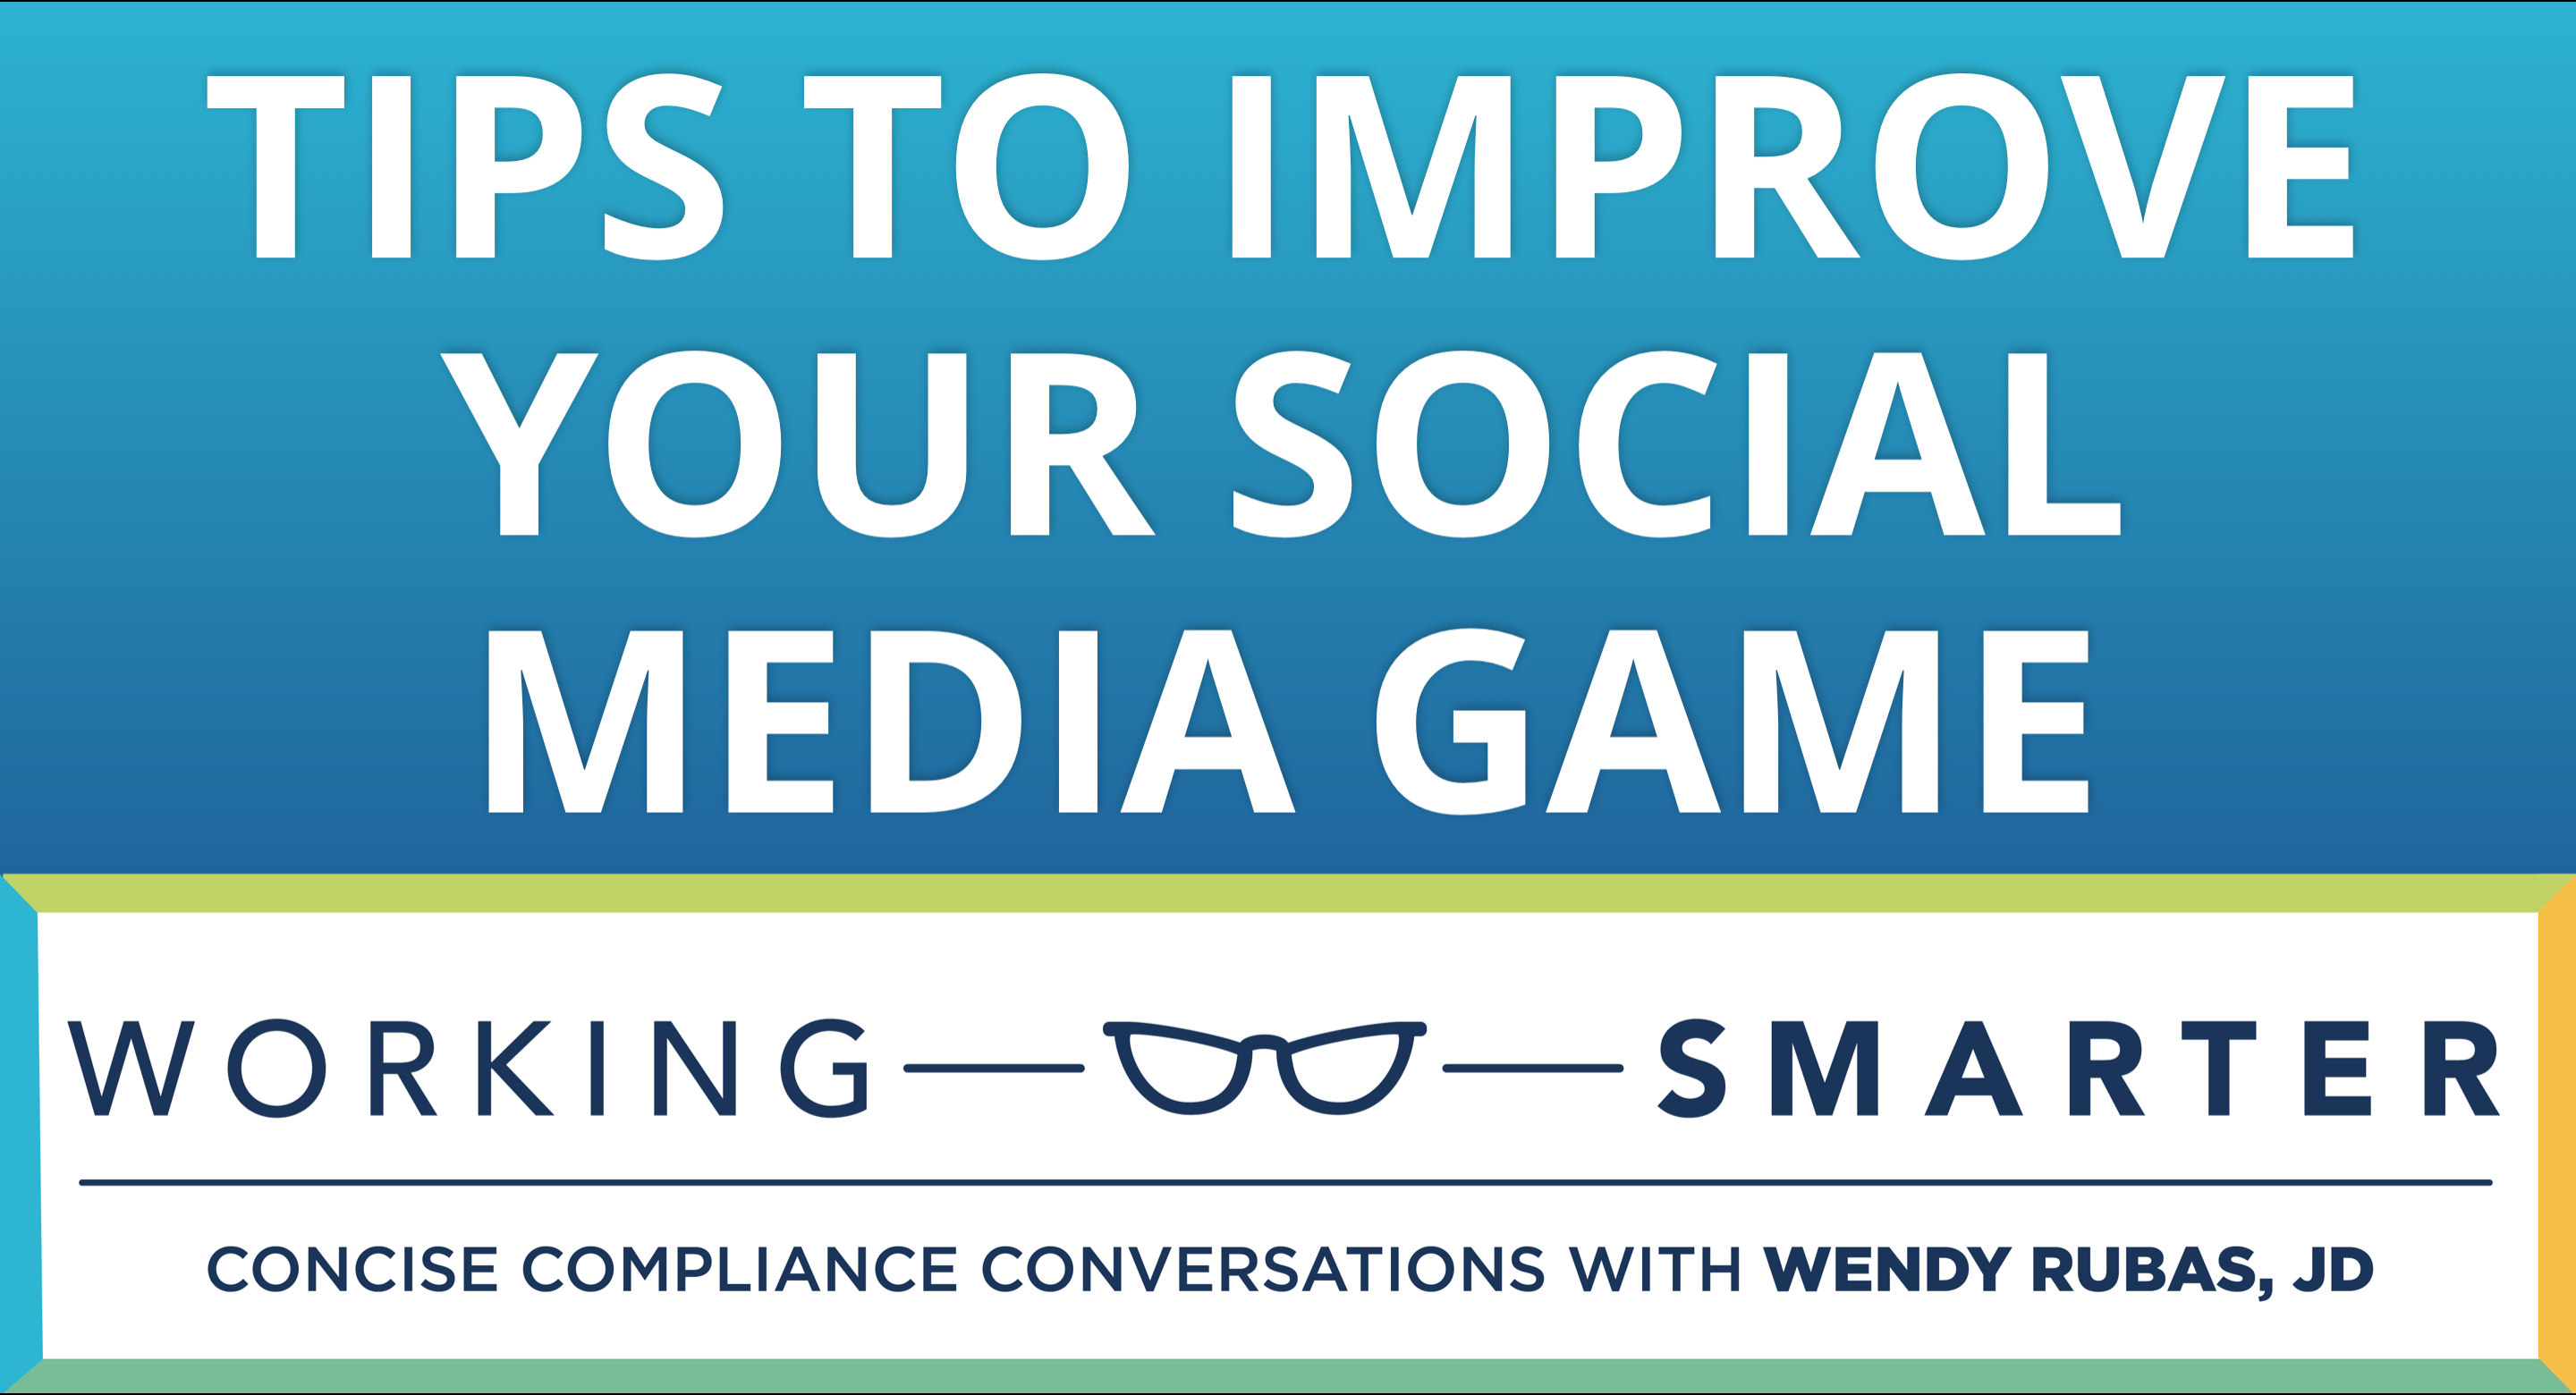 Working Smarter: Tips to Improve Your Social Media Game